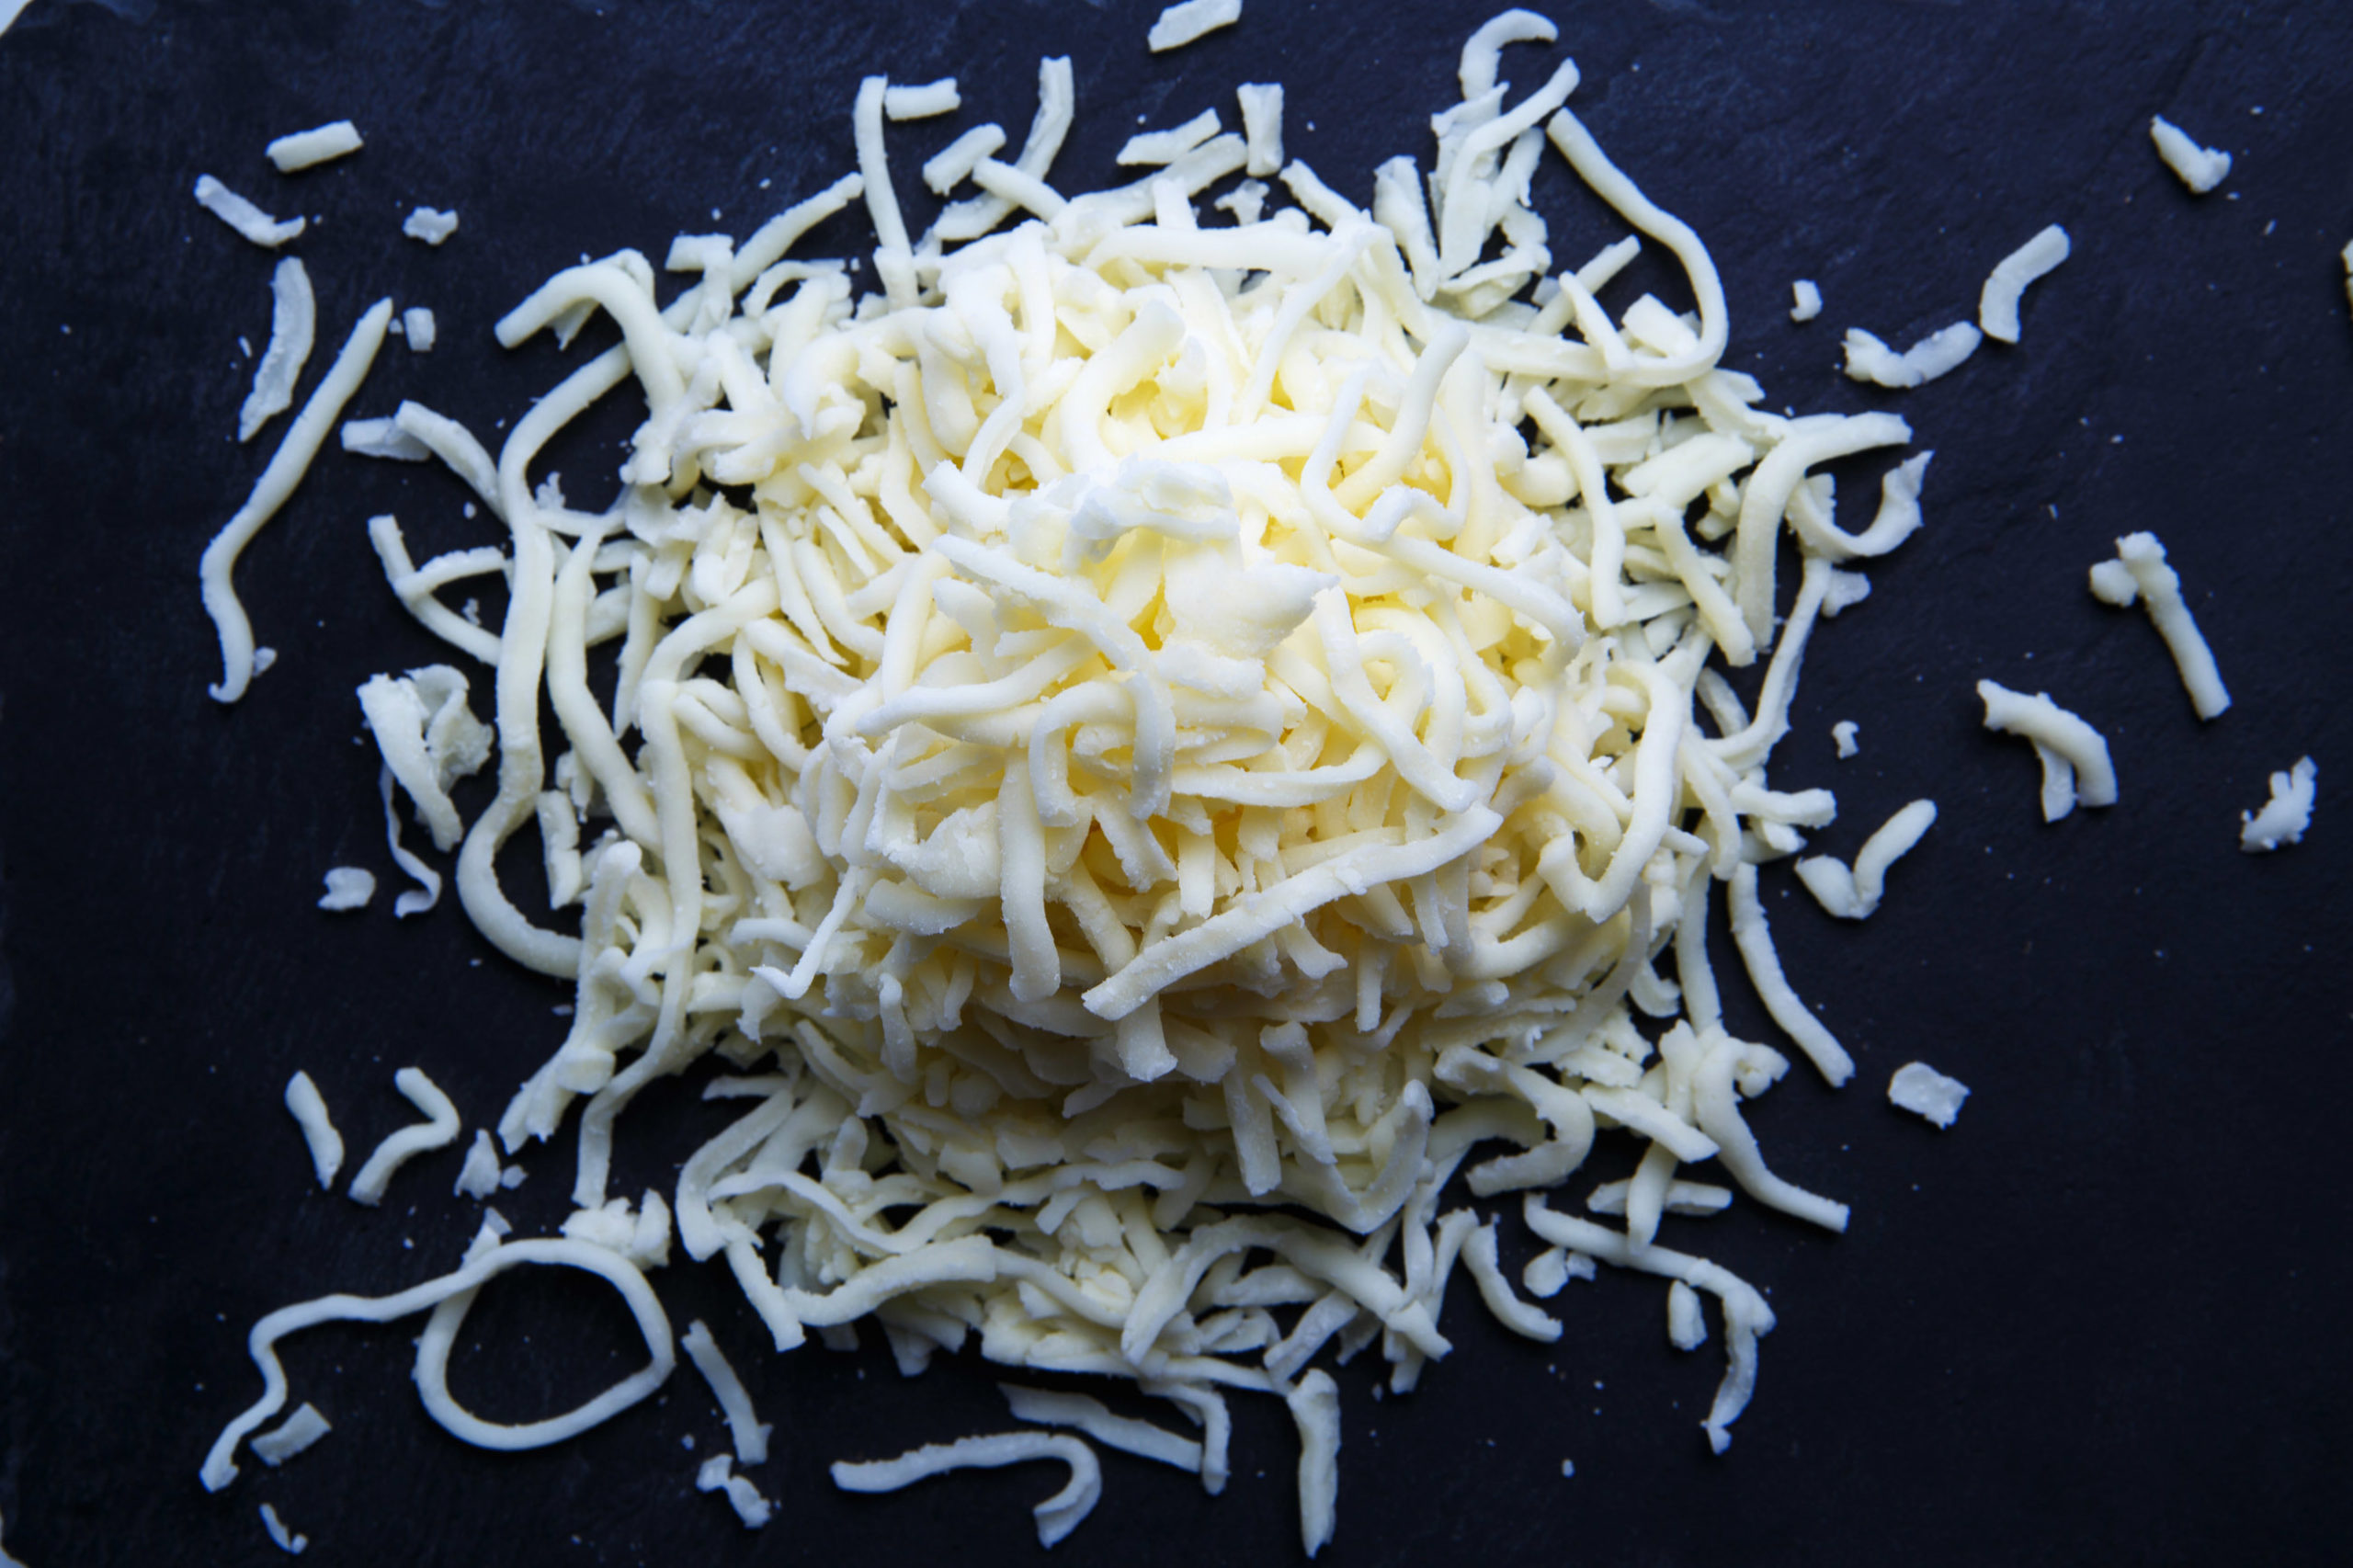 Monday Mission: Shred Your Own Cheese